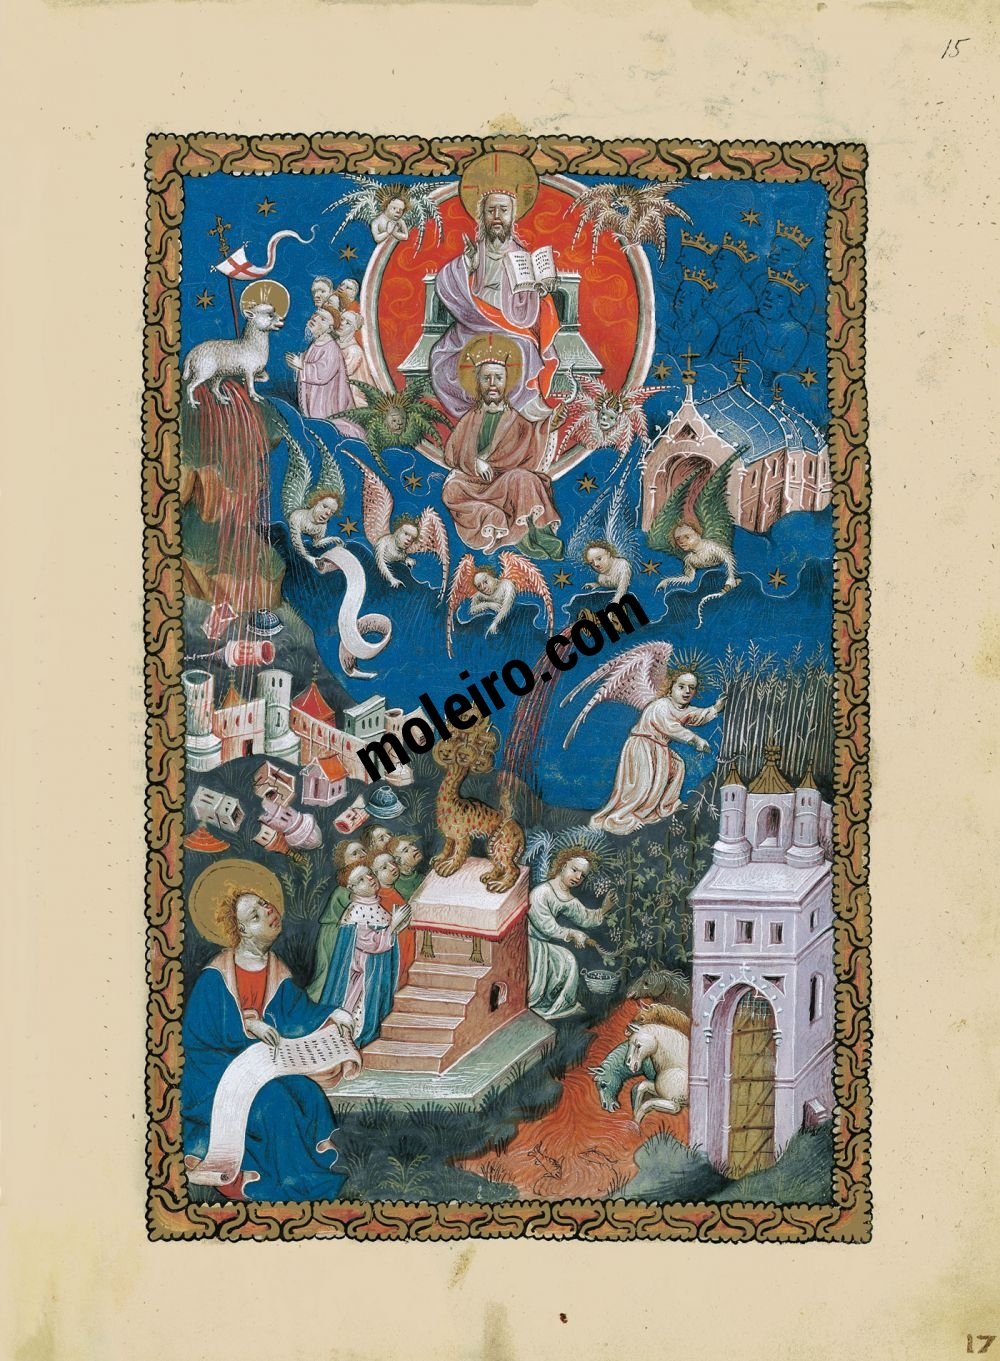 Flemish Apocalypse f. 15r, The adoration of the Lamb, the fall of Babylon, the harvesting of the earth